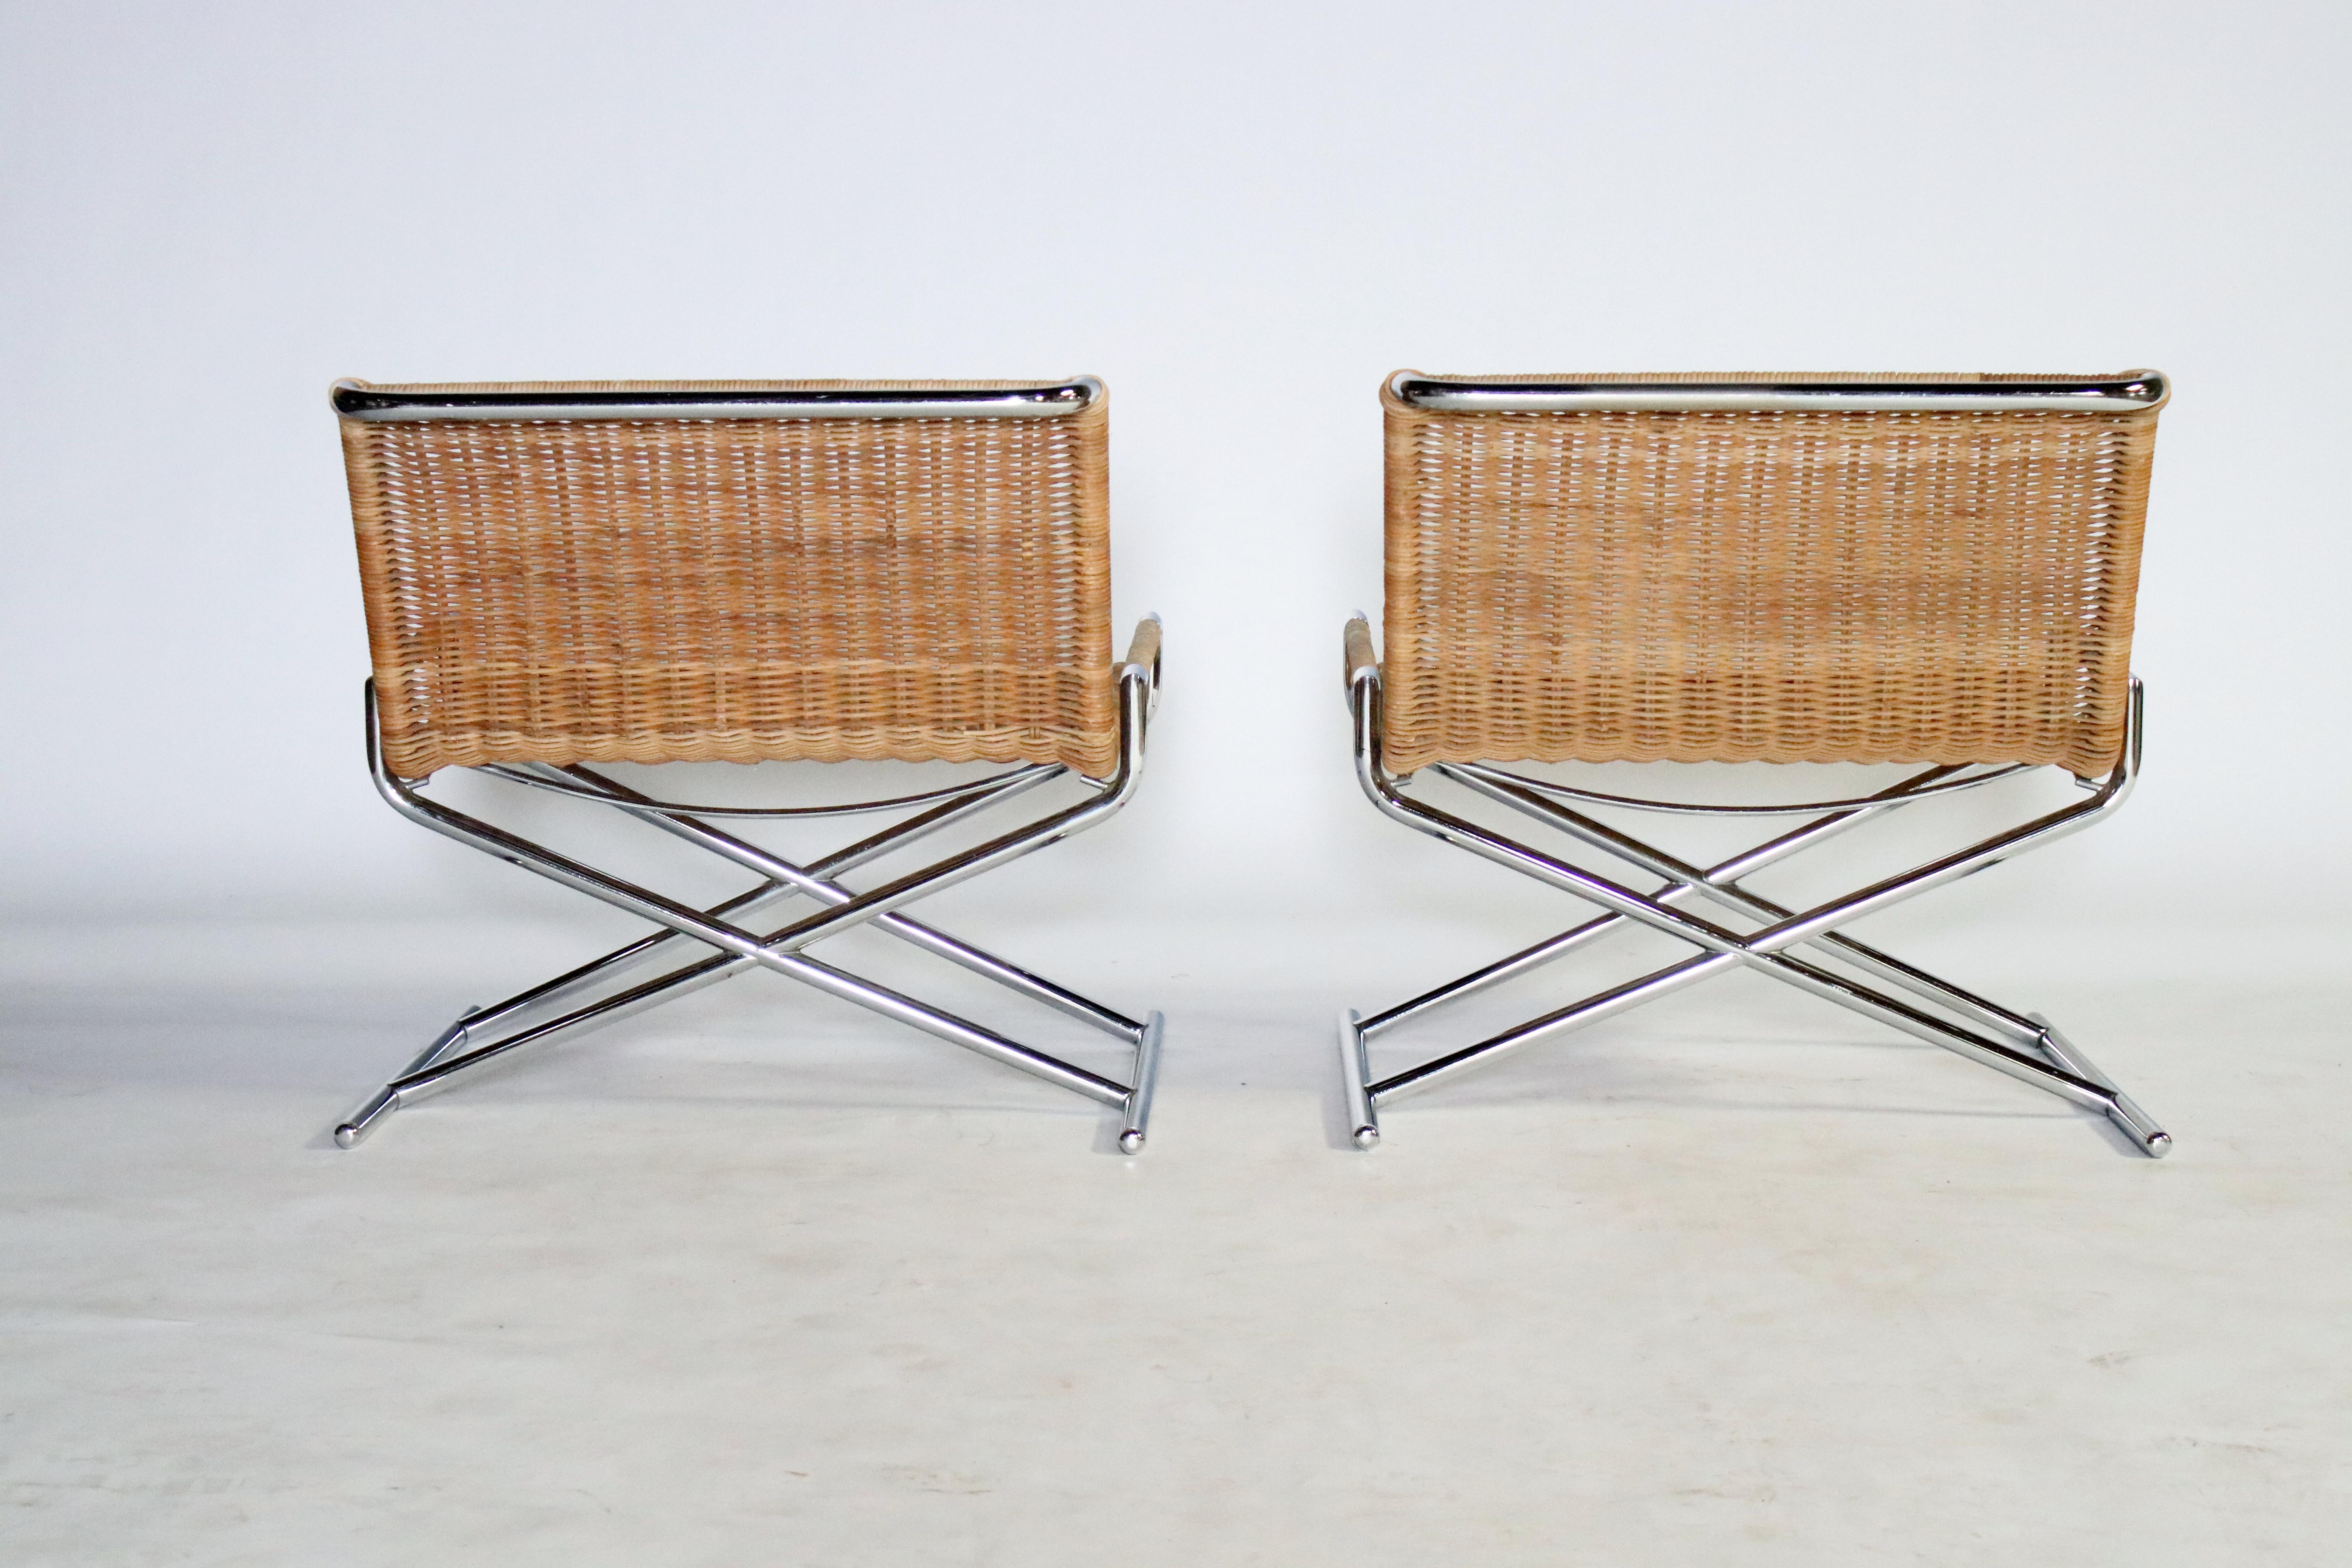 Polished Ward Bennett Brickell Sled Chairs